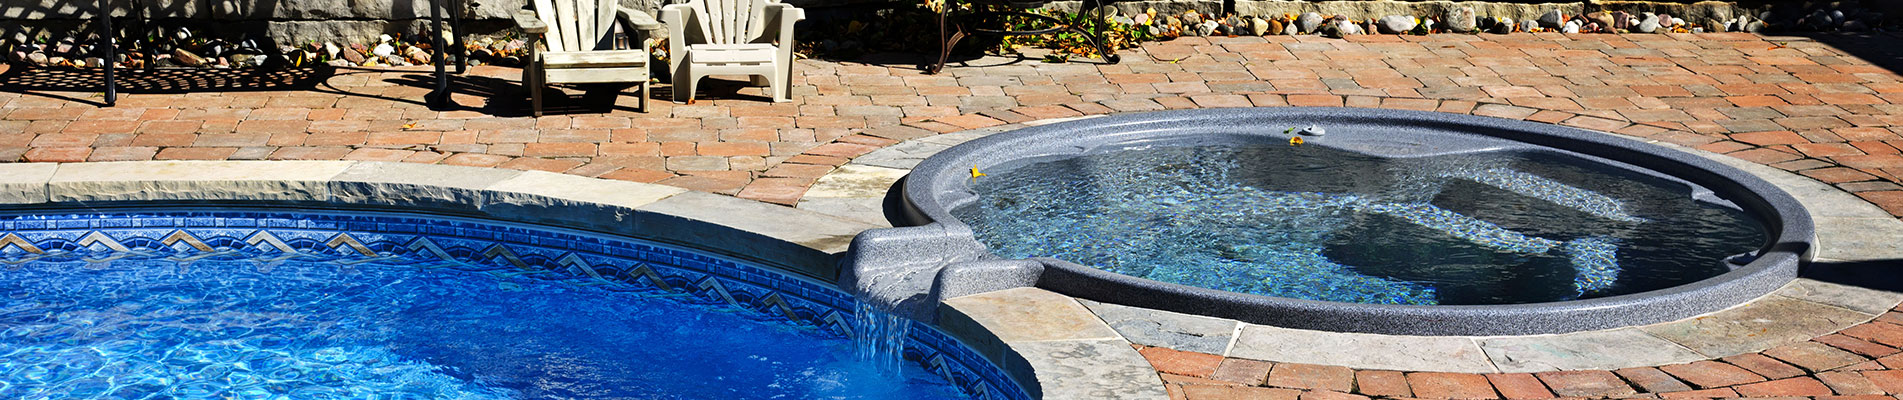 Hot Tubs, Swimming Pools, Spas & Ponds | All Pro Electric Portland, OR